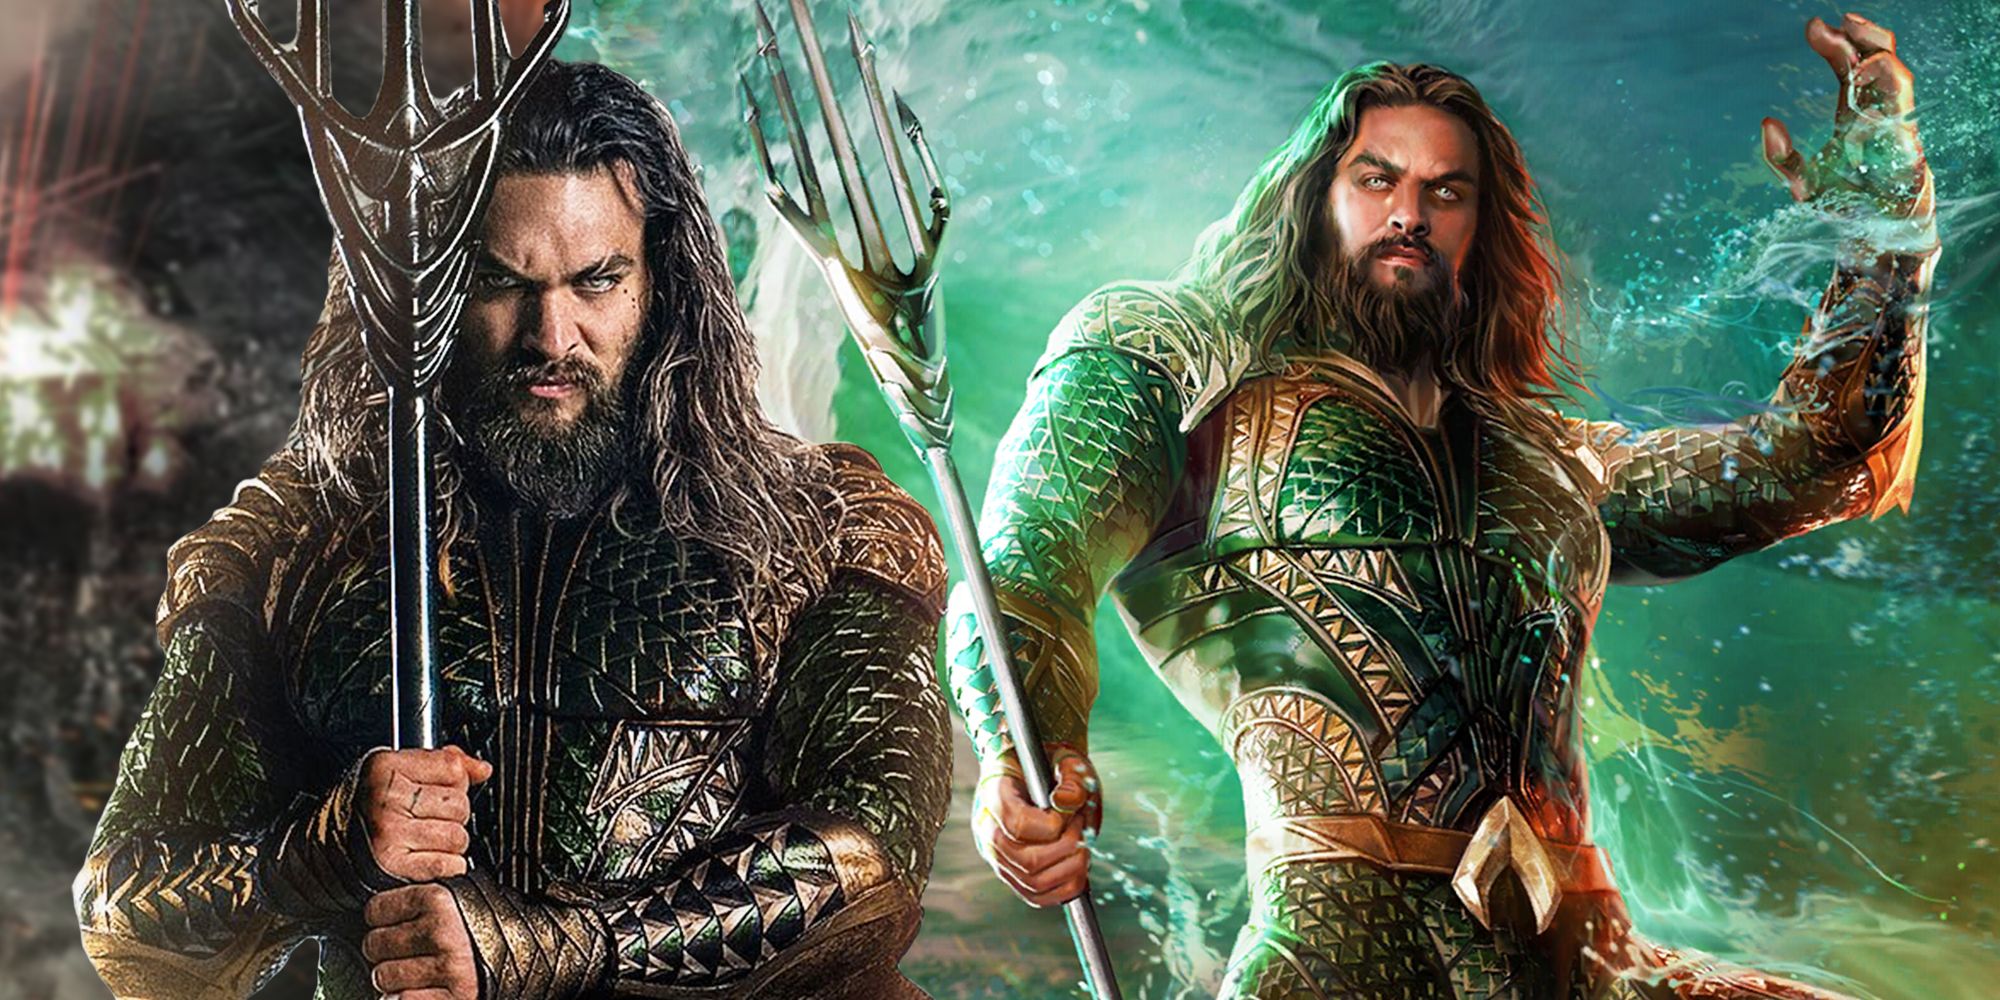 Aquaman Armor in Zack Snyder's Justice League and Theatrical Cut